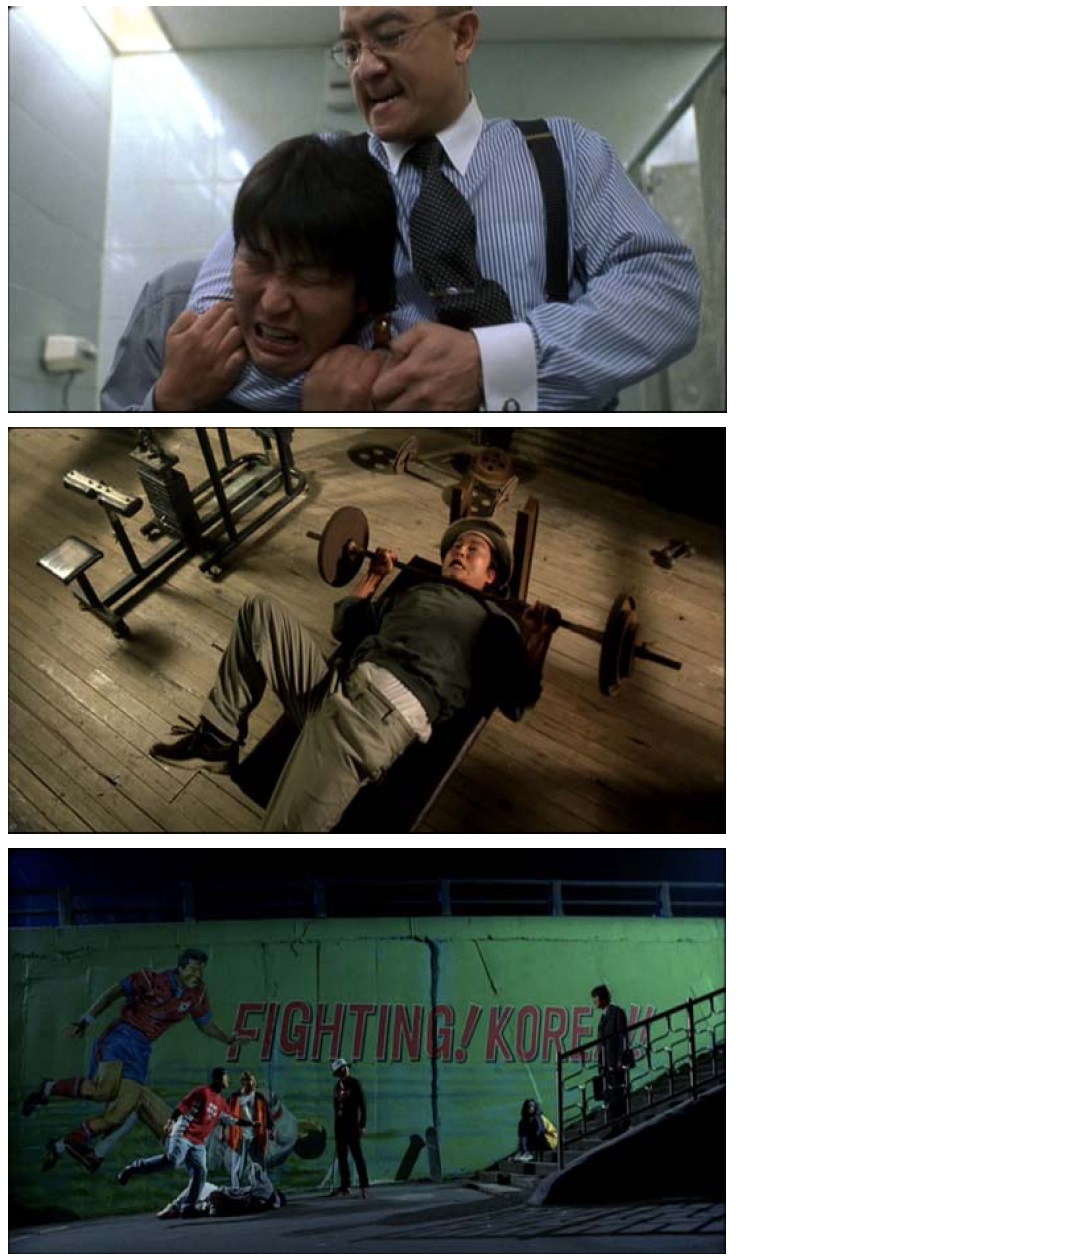 Film stills from the DVD The Foul King (2000, B.O.M. Film Productions). Top: Dae-ho’s manager holding him in a surprise headlock in the men’s bathroom; middle: Dae-ho at the wrestling gym struggling with too much weight; bottom: Dae-ho attempting to save a boy from being beaten-up by a gang of hoodlums.